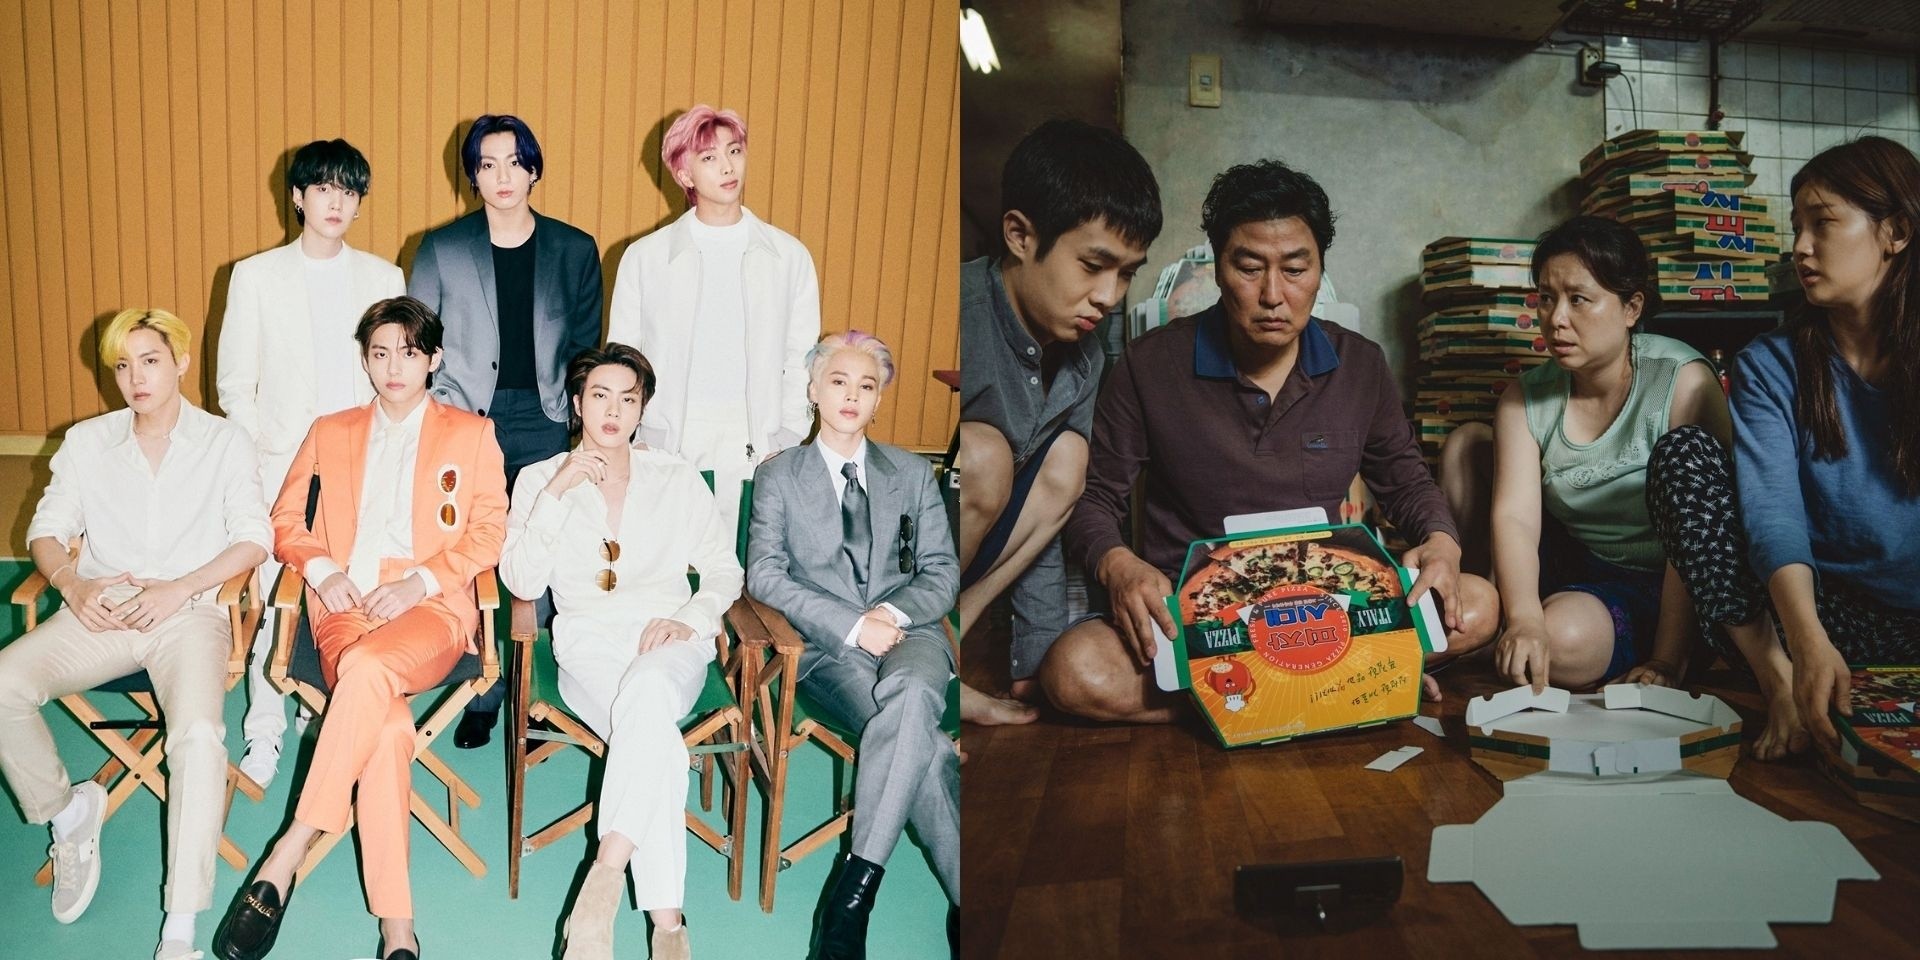 UNESCO to hold 'Korea: Cubically Imagined' exhibition in Paris featuring BTS, 'Parasite', and more